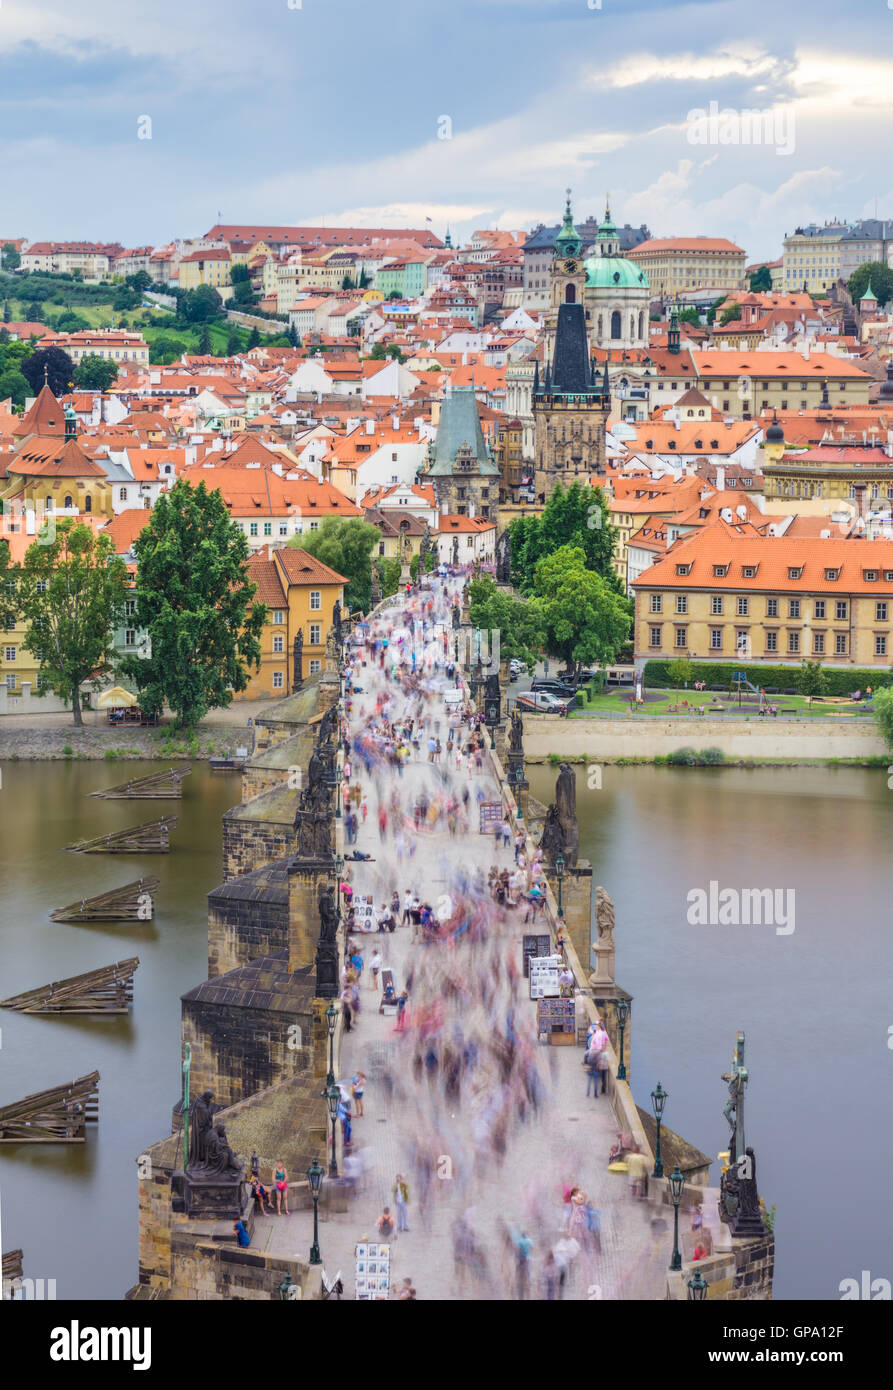 The Charles bridge is located in Prague, Czech Republic. Finished in the XV century, it crosses the Vltava river, leading the ca Stock Photo